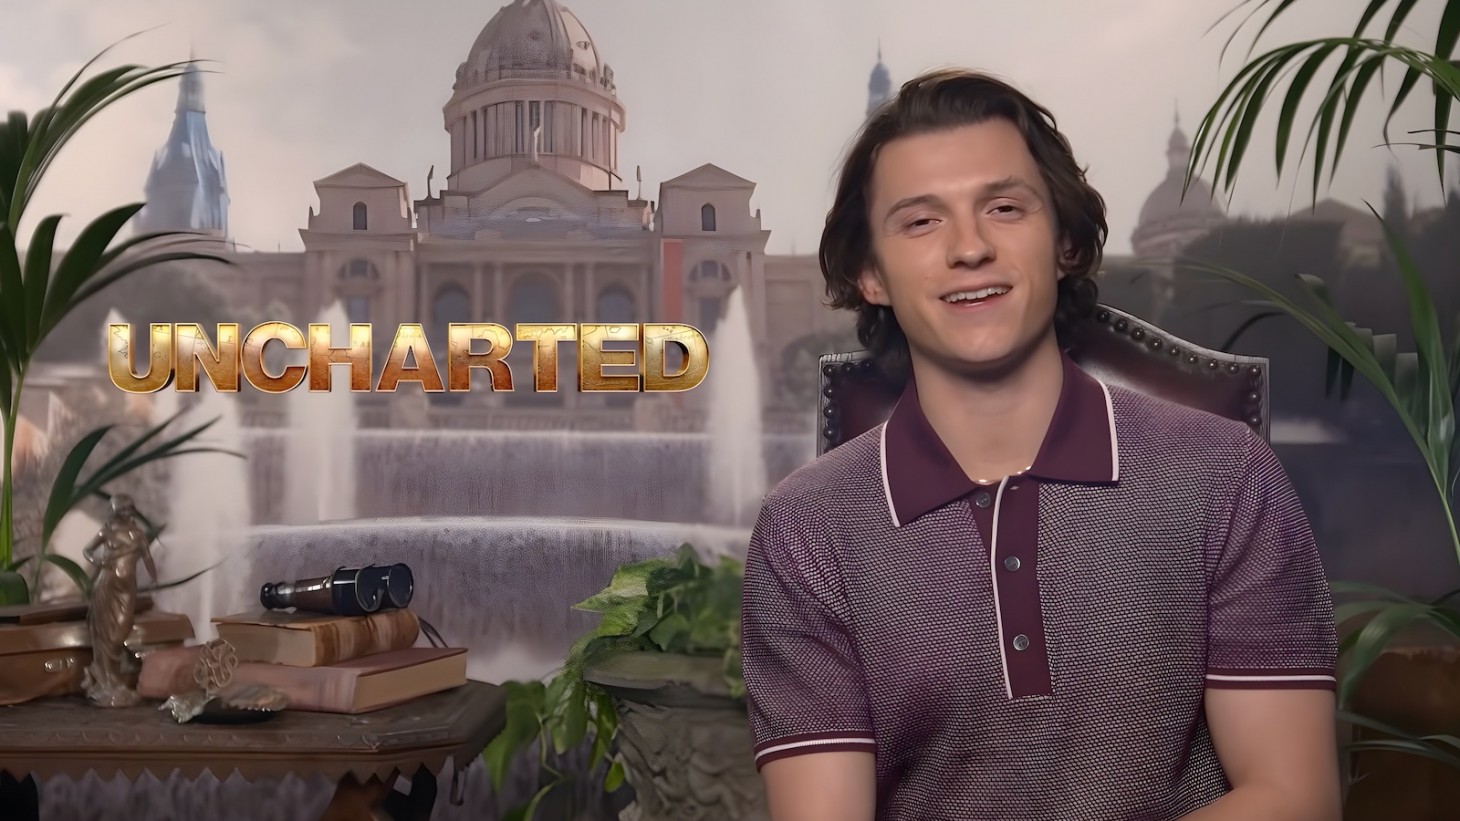 Tom Holland Admits to a Mistake He Made While Playing Nathan Drake